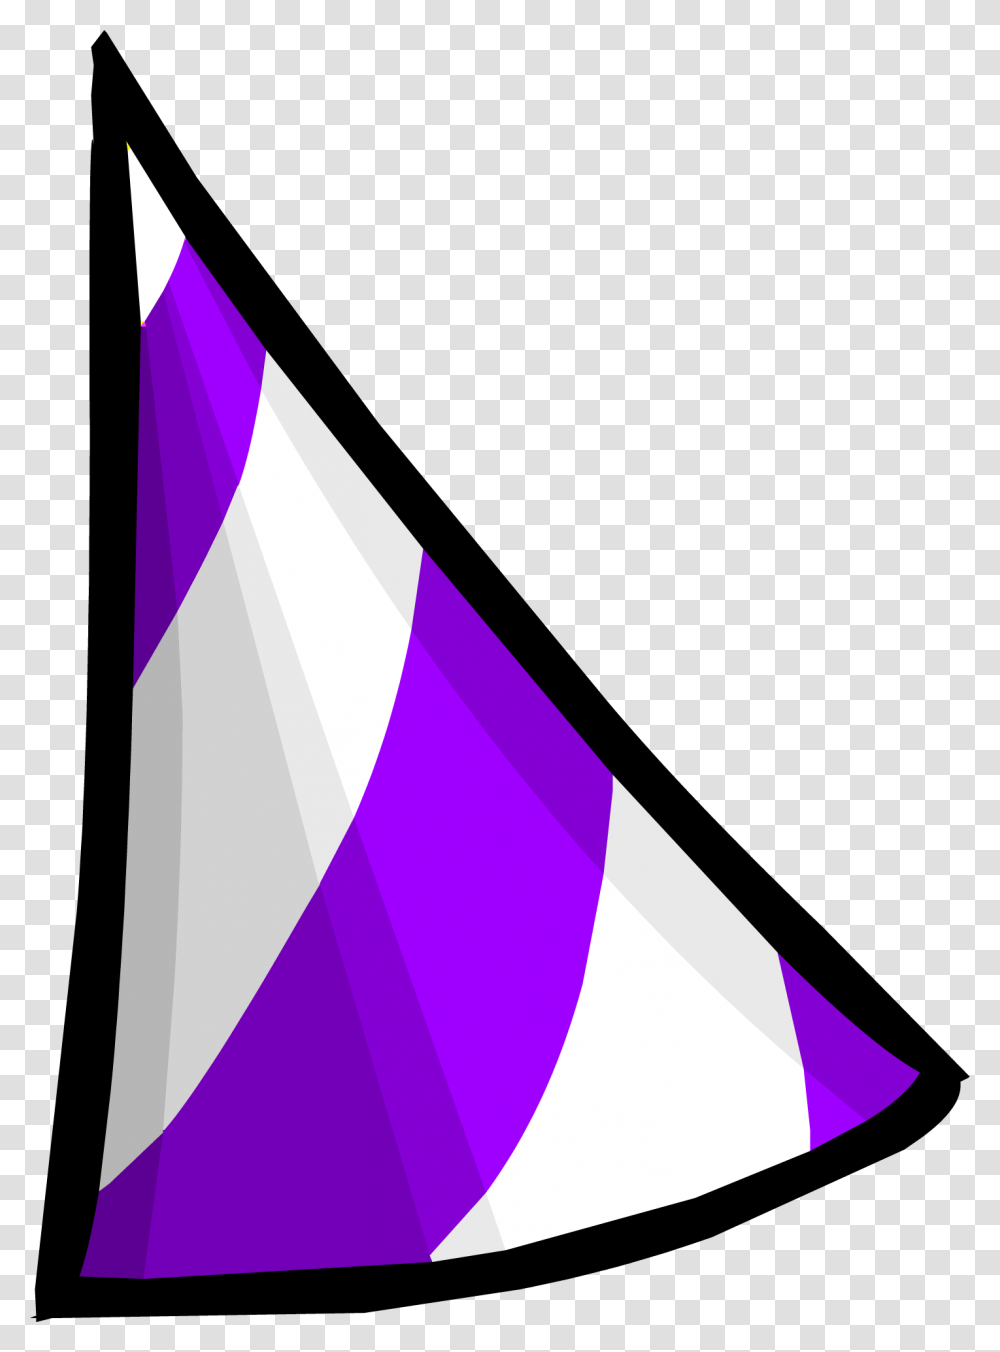 Club Penguin Rewritten Wiki Club Penguin Rewritten 2nd Anniversary Hat, Apparel, Cone, Party Hat Transparent Png